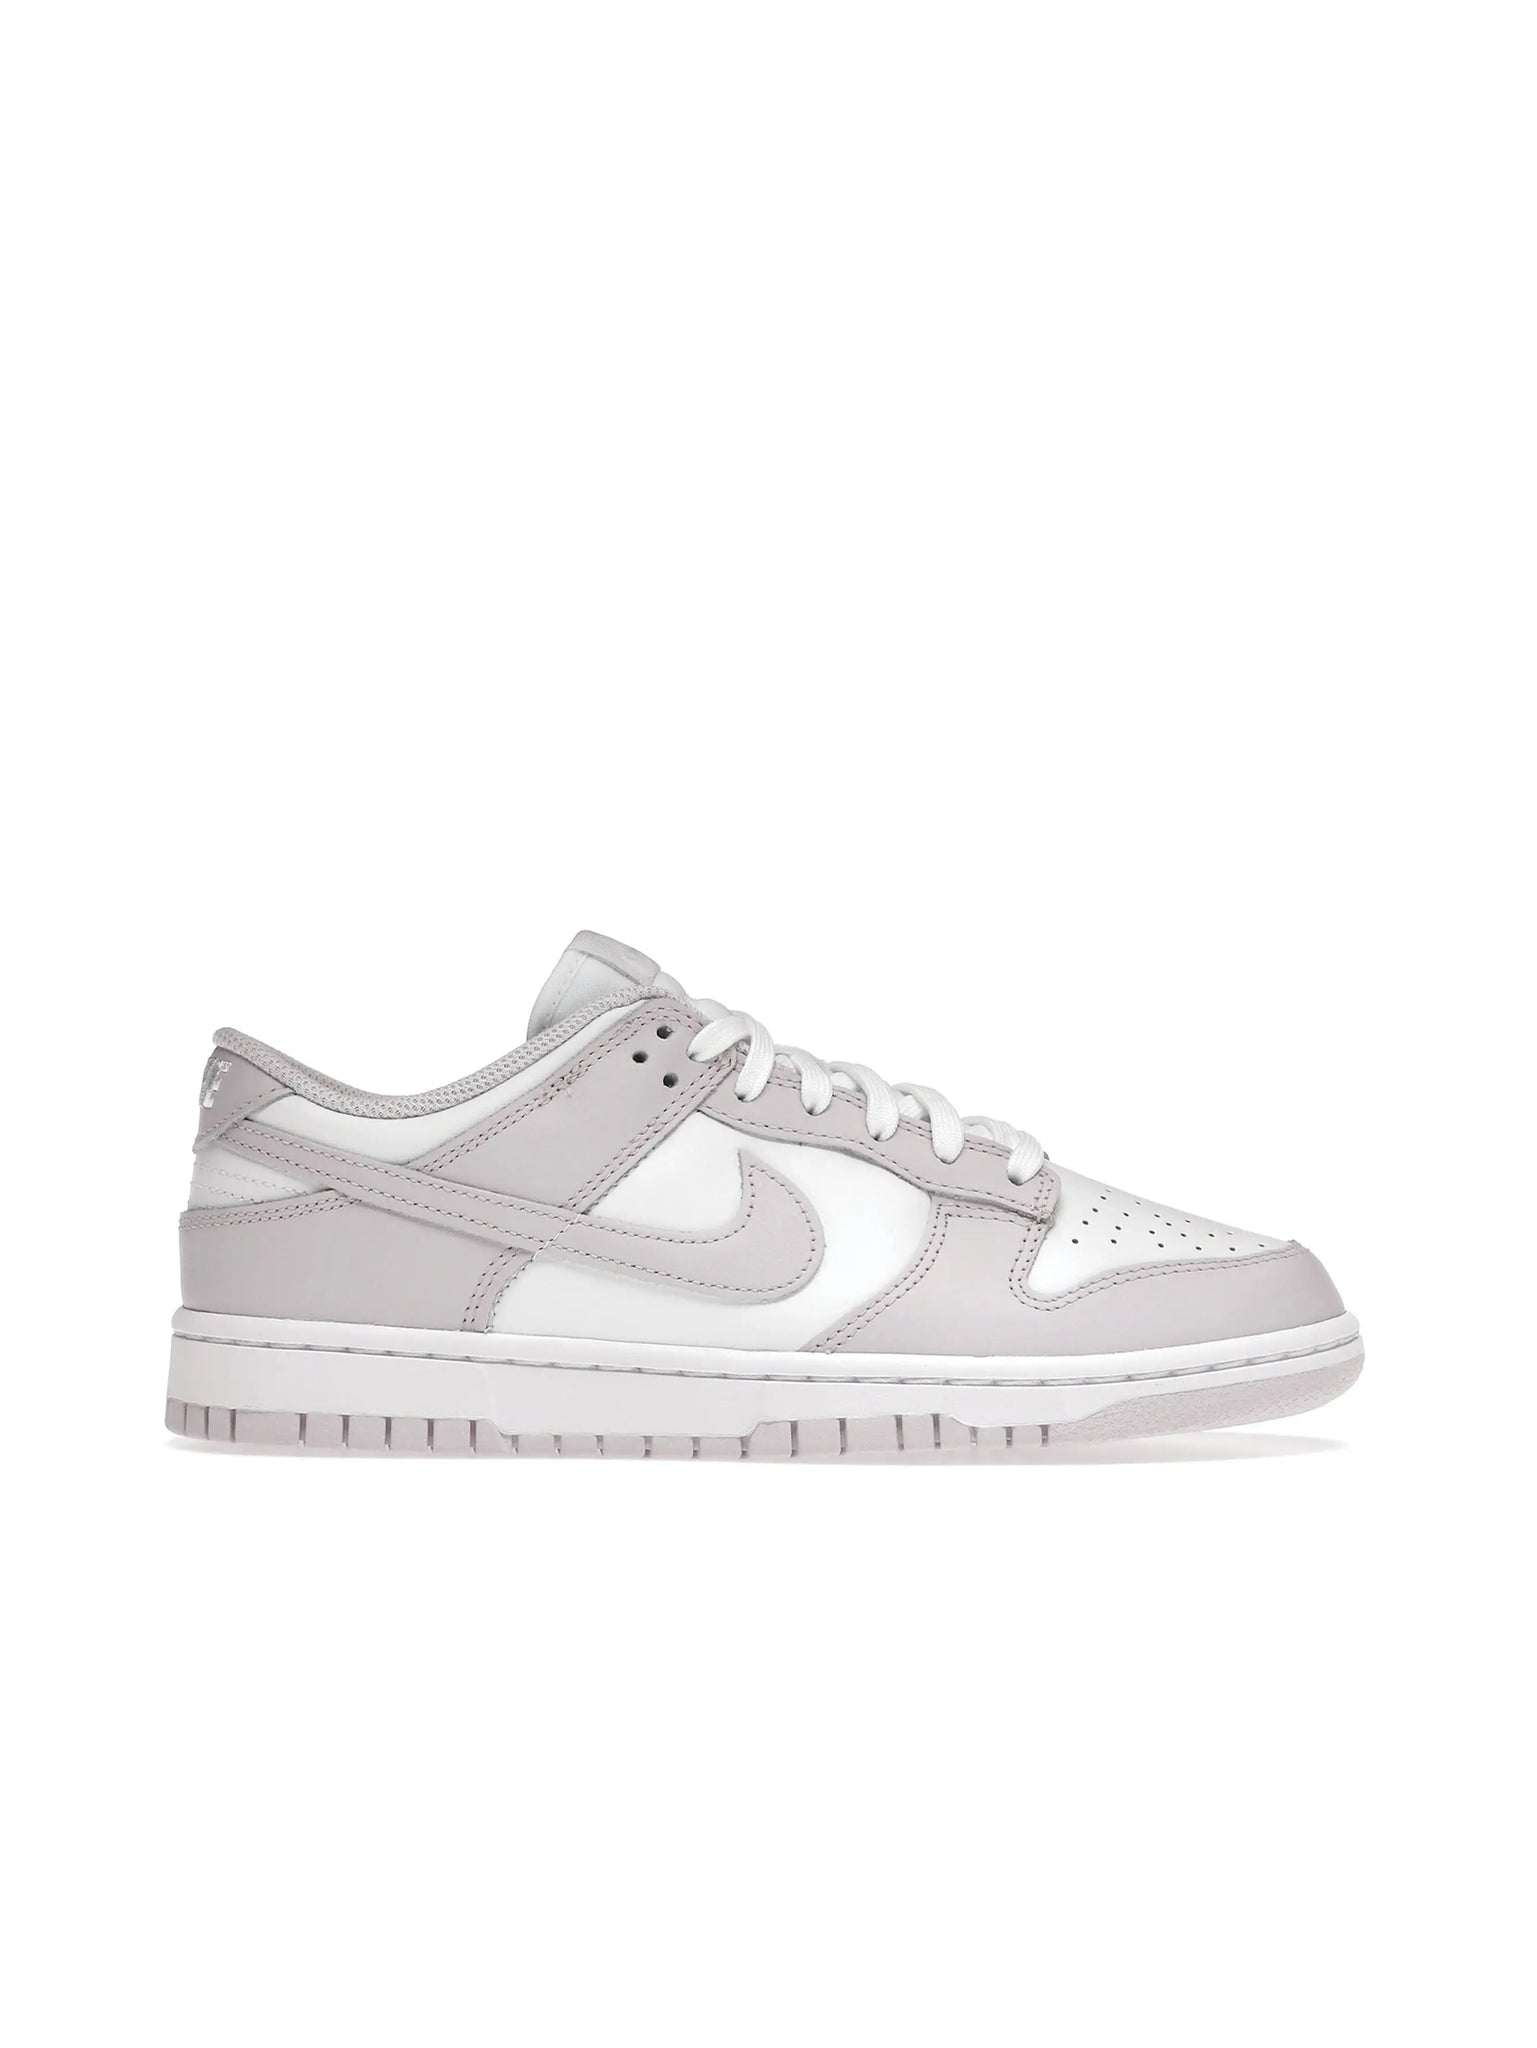 Nike Dunk Low Venice (W) in Auckland, New Zealand - Shop name